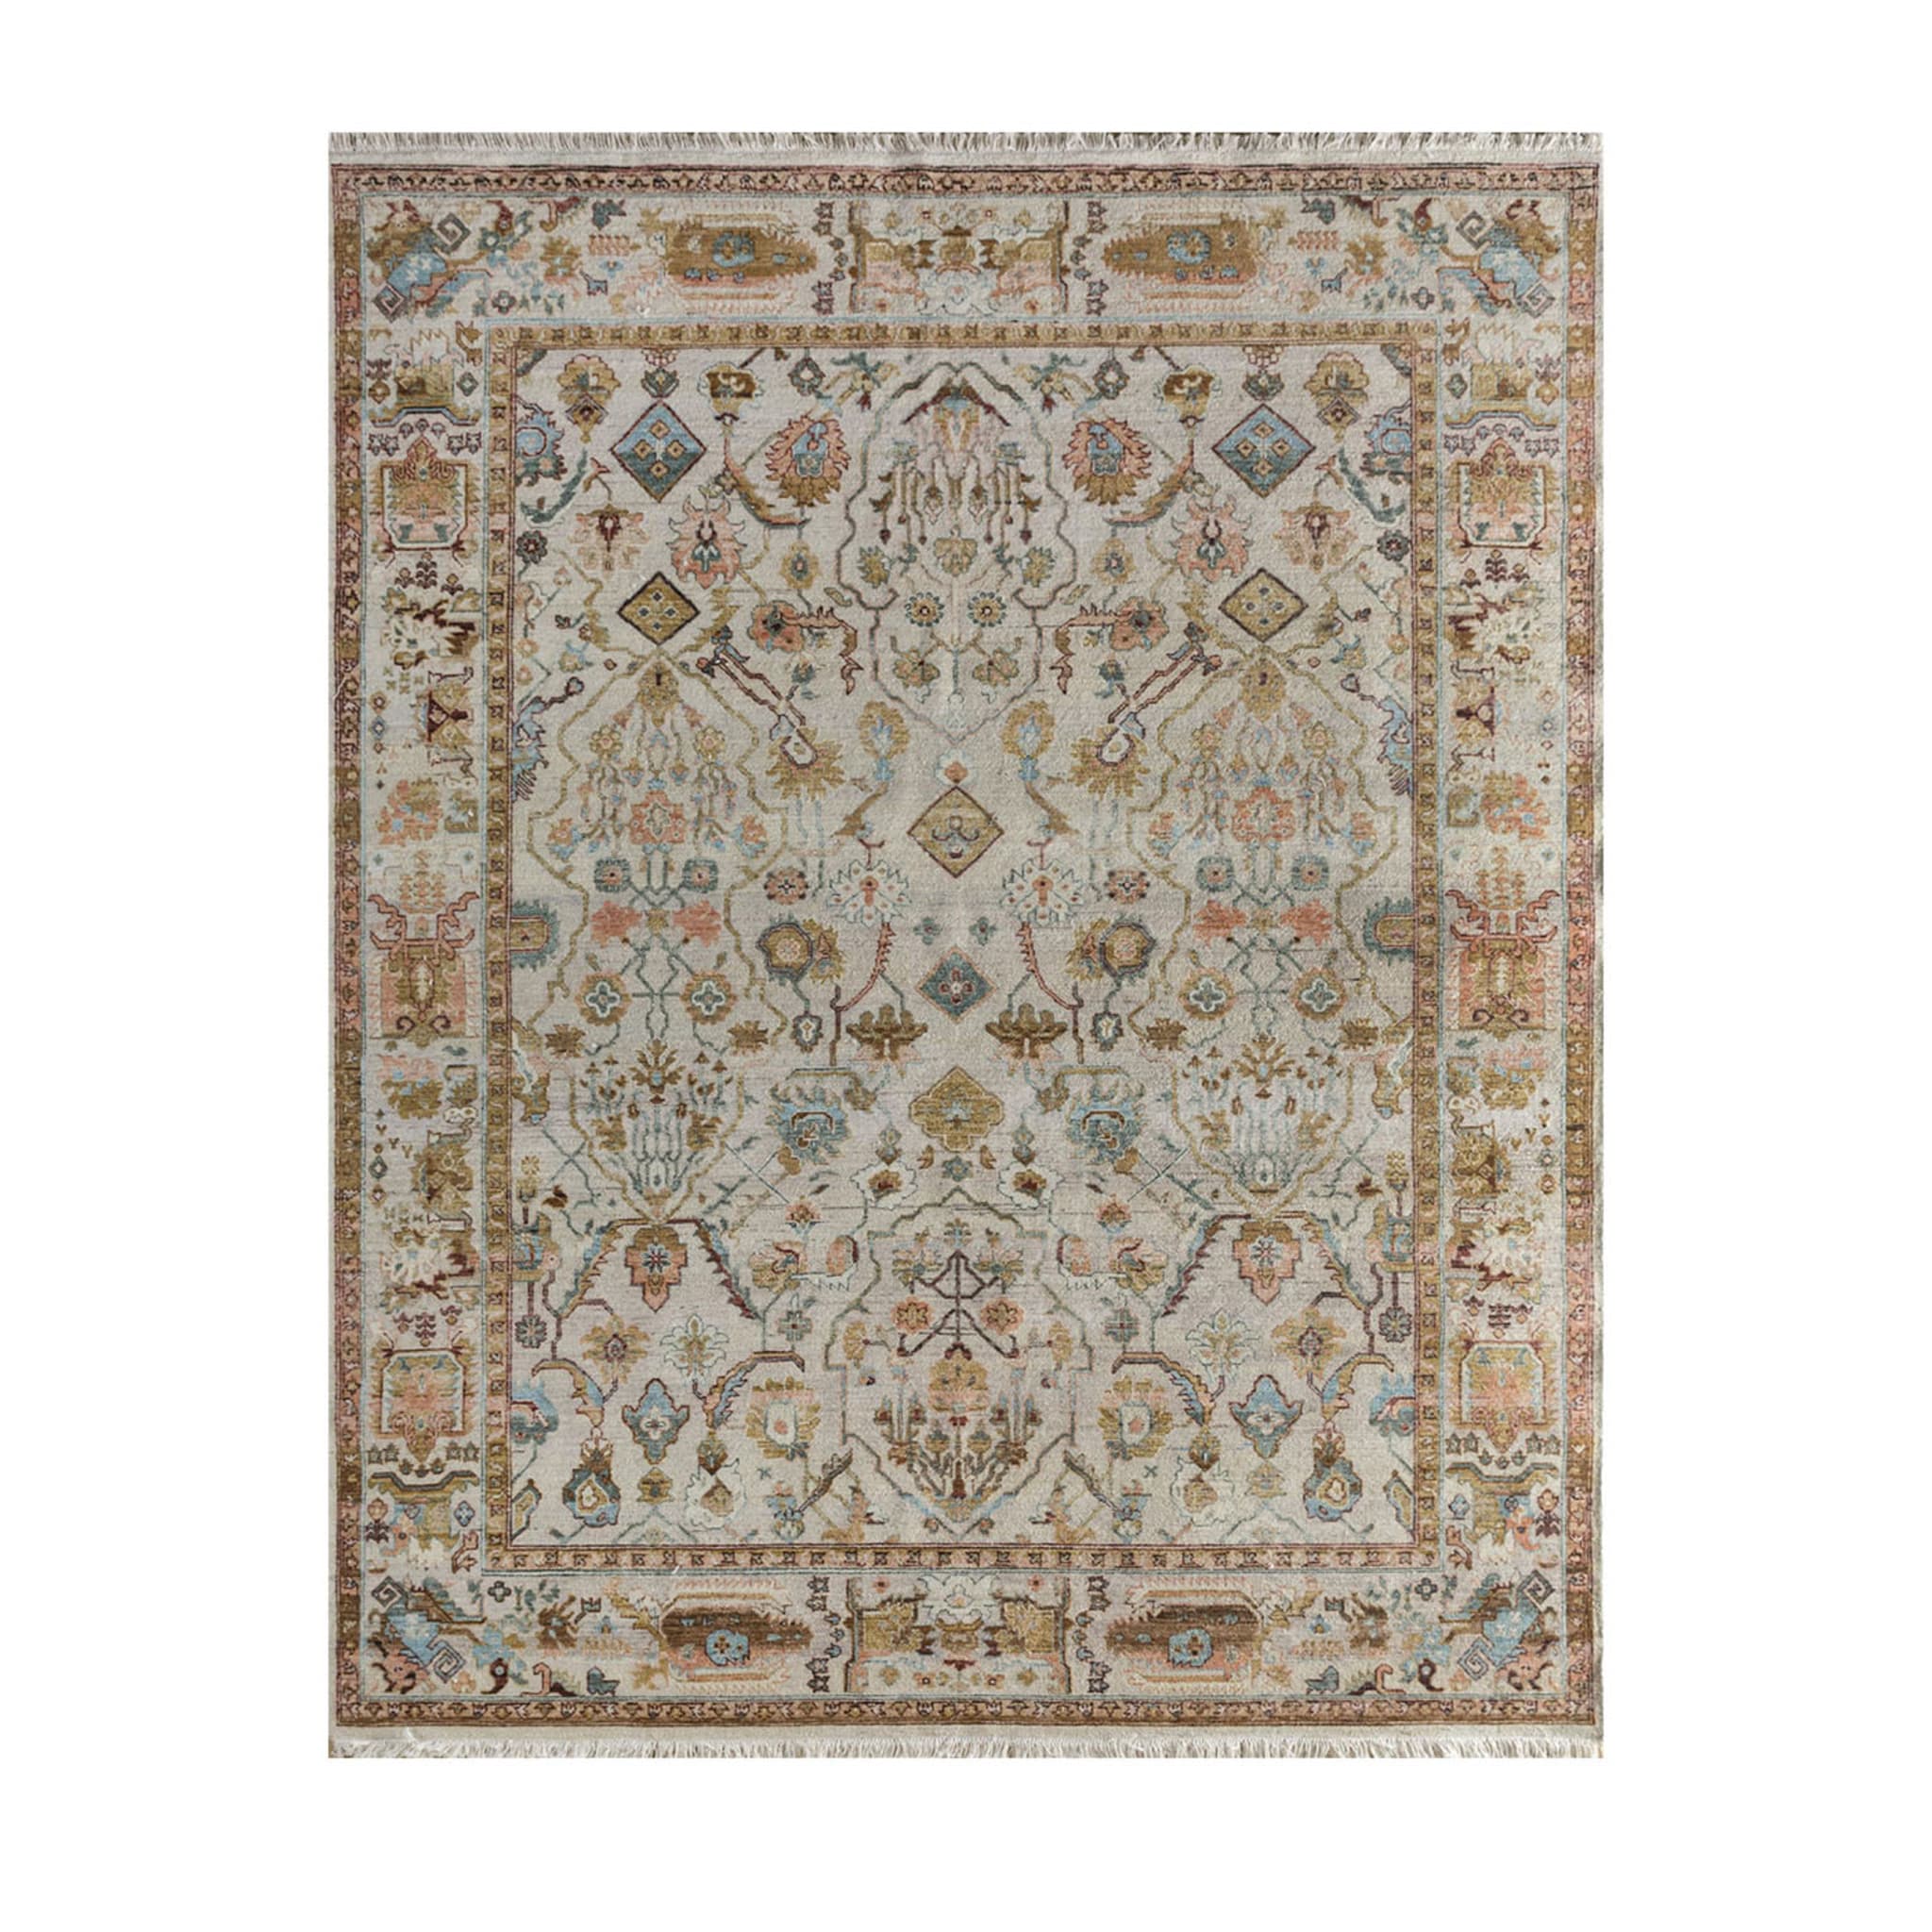 Oxidize Washed Hand Knotted Rug in Cloud White Dark Ivory - Main view